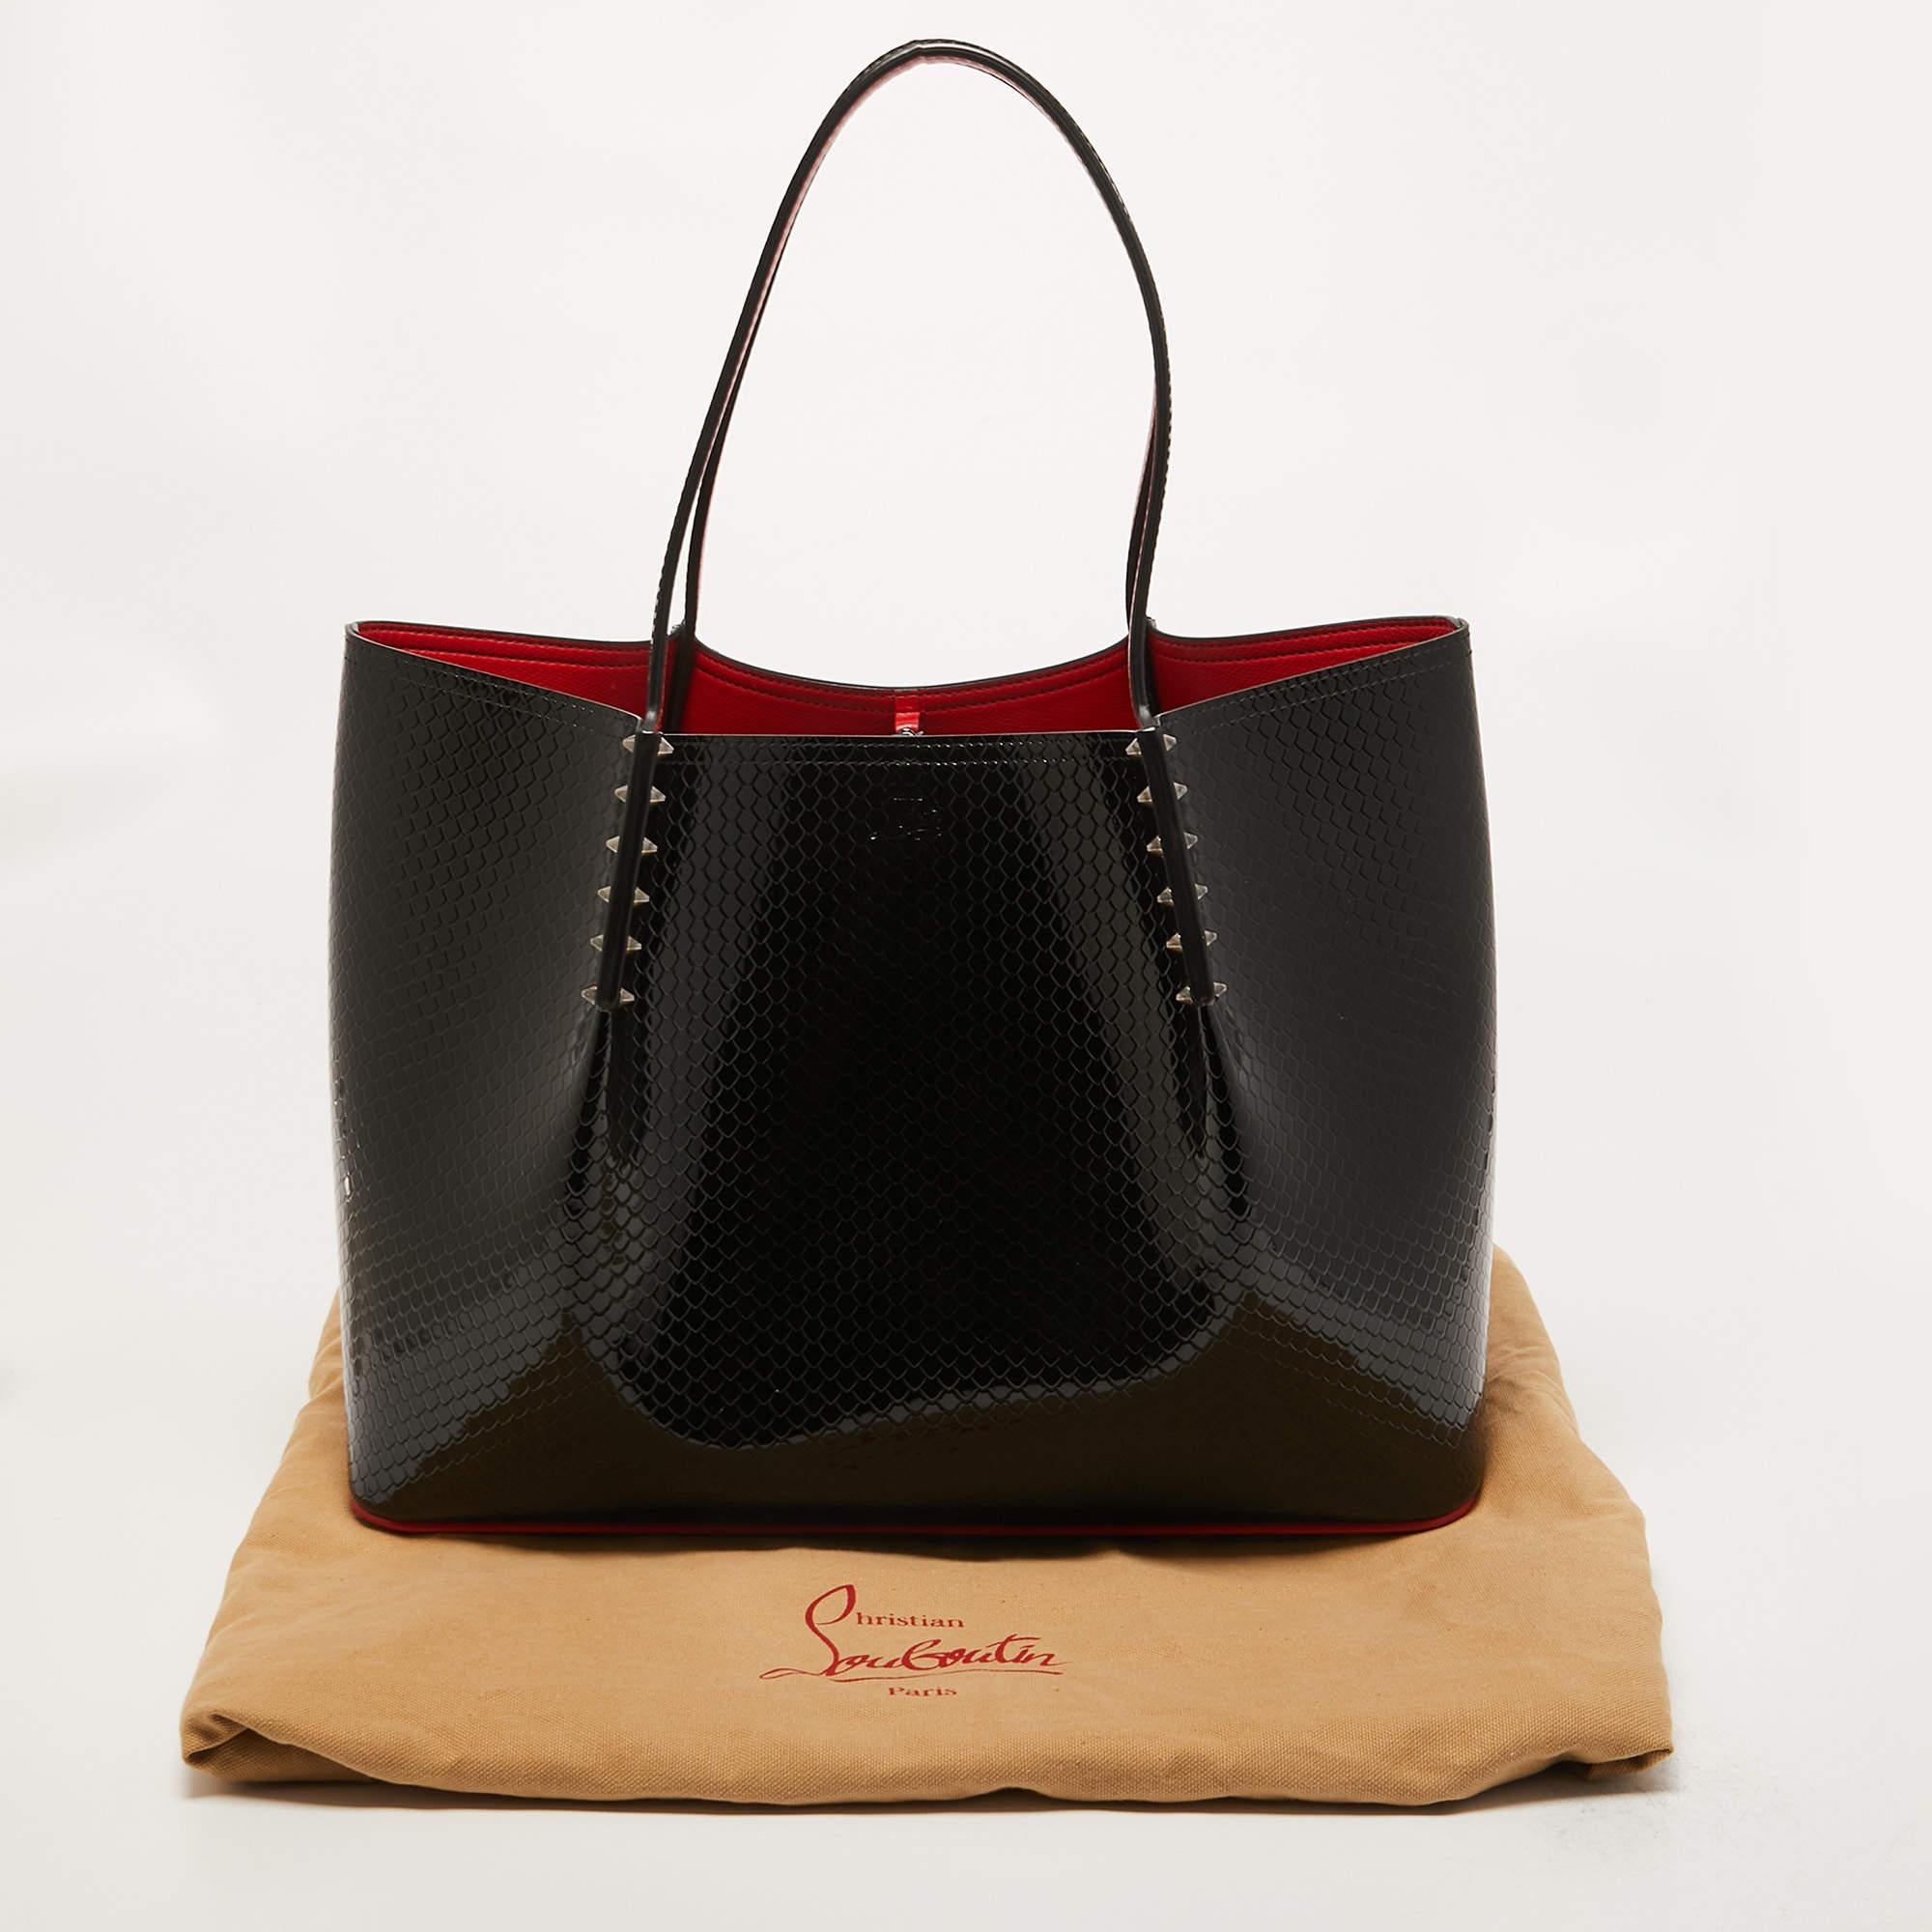 Christian Louboutin Black Embossed Patent Leather Large Cabarock Tote 1